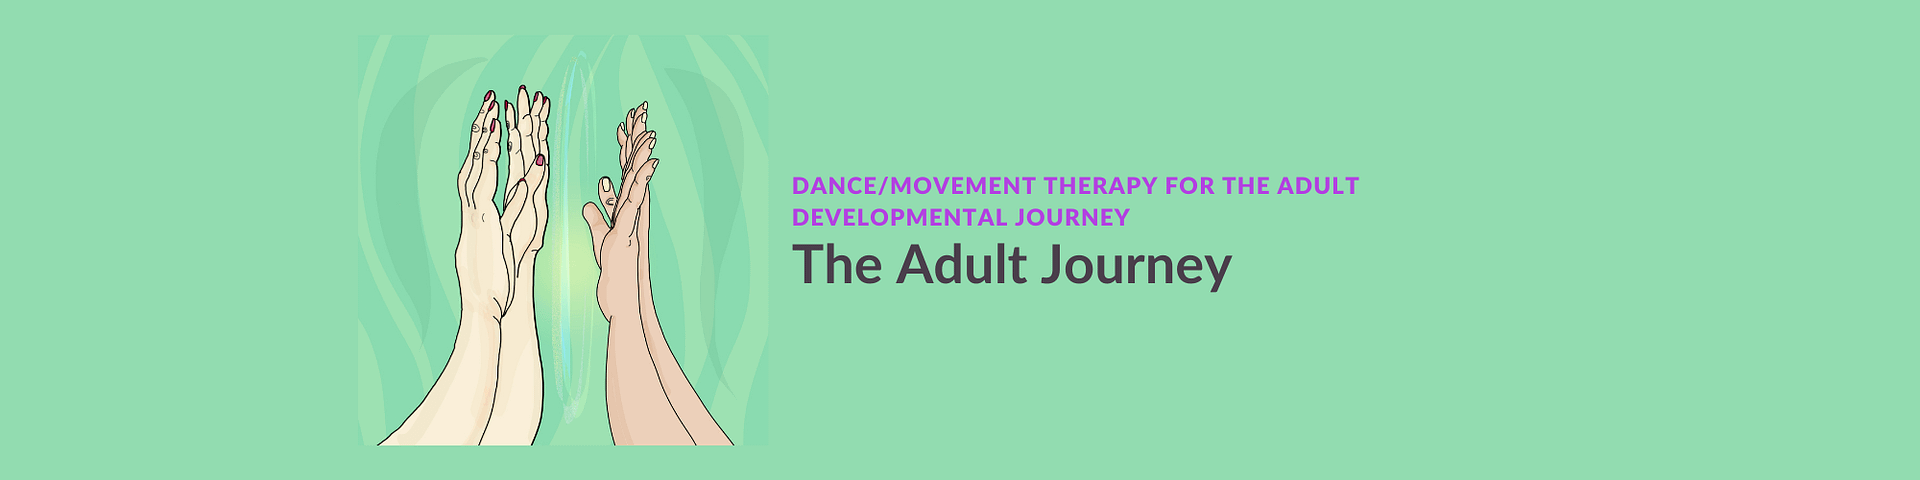 The Adult Journey